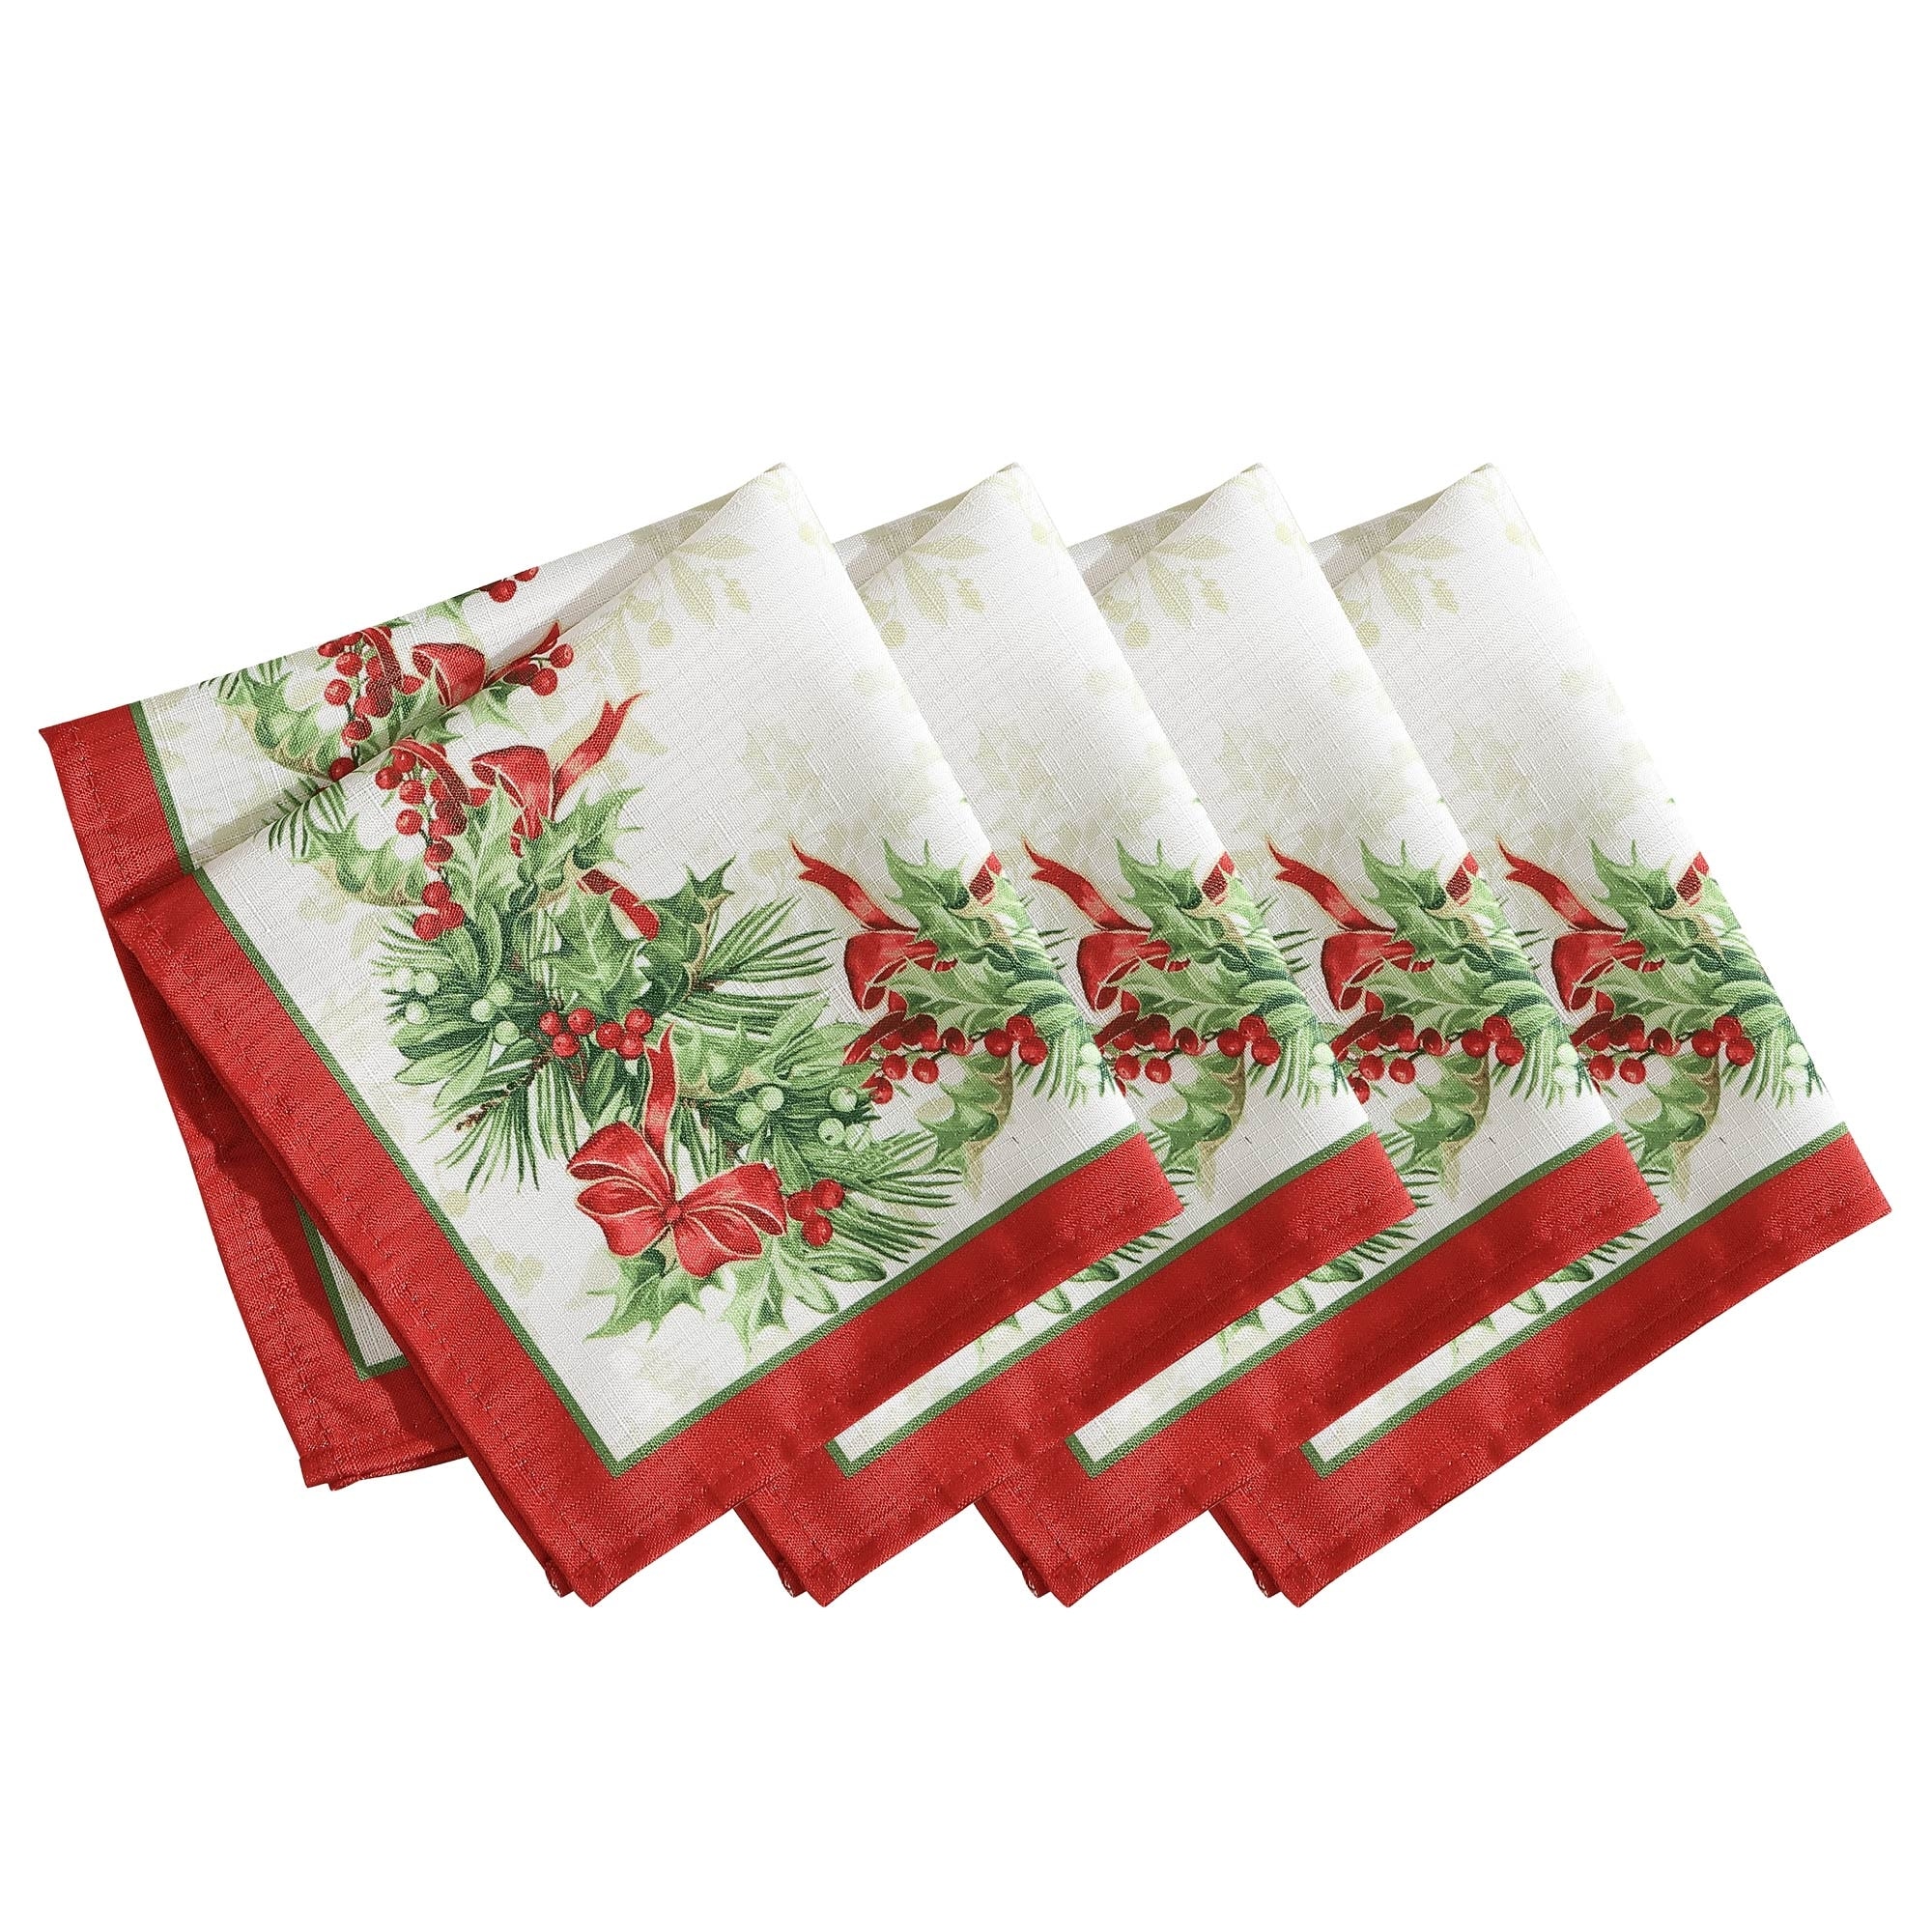 https://ak1.ostkcdn.com/images/products/is/images/direct/baa02735e41b5e376851d57a56ea0798799a3990/Holly-Traditions-Holiday-Napkins%2C-Set-of-4.jpg